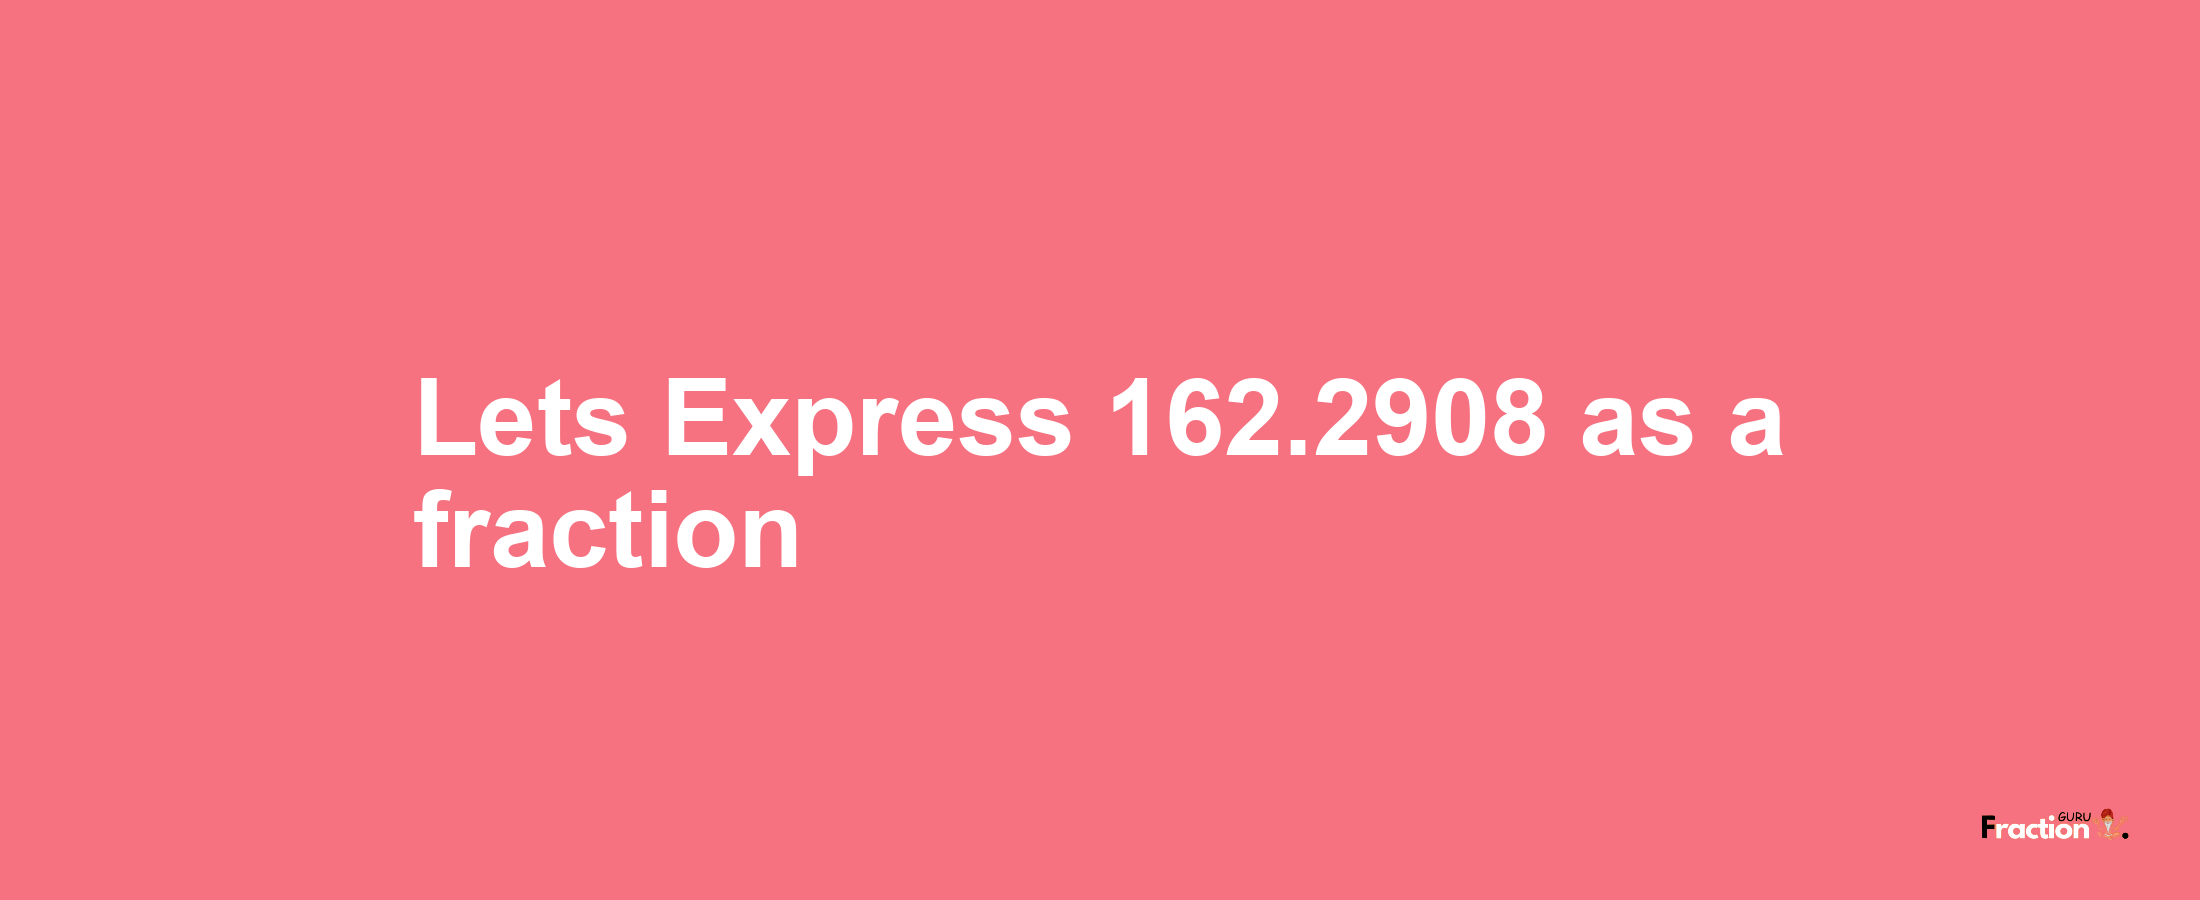 Lets Express 162.2908 as afraction